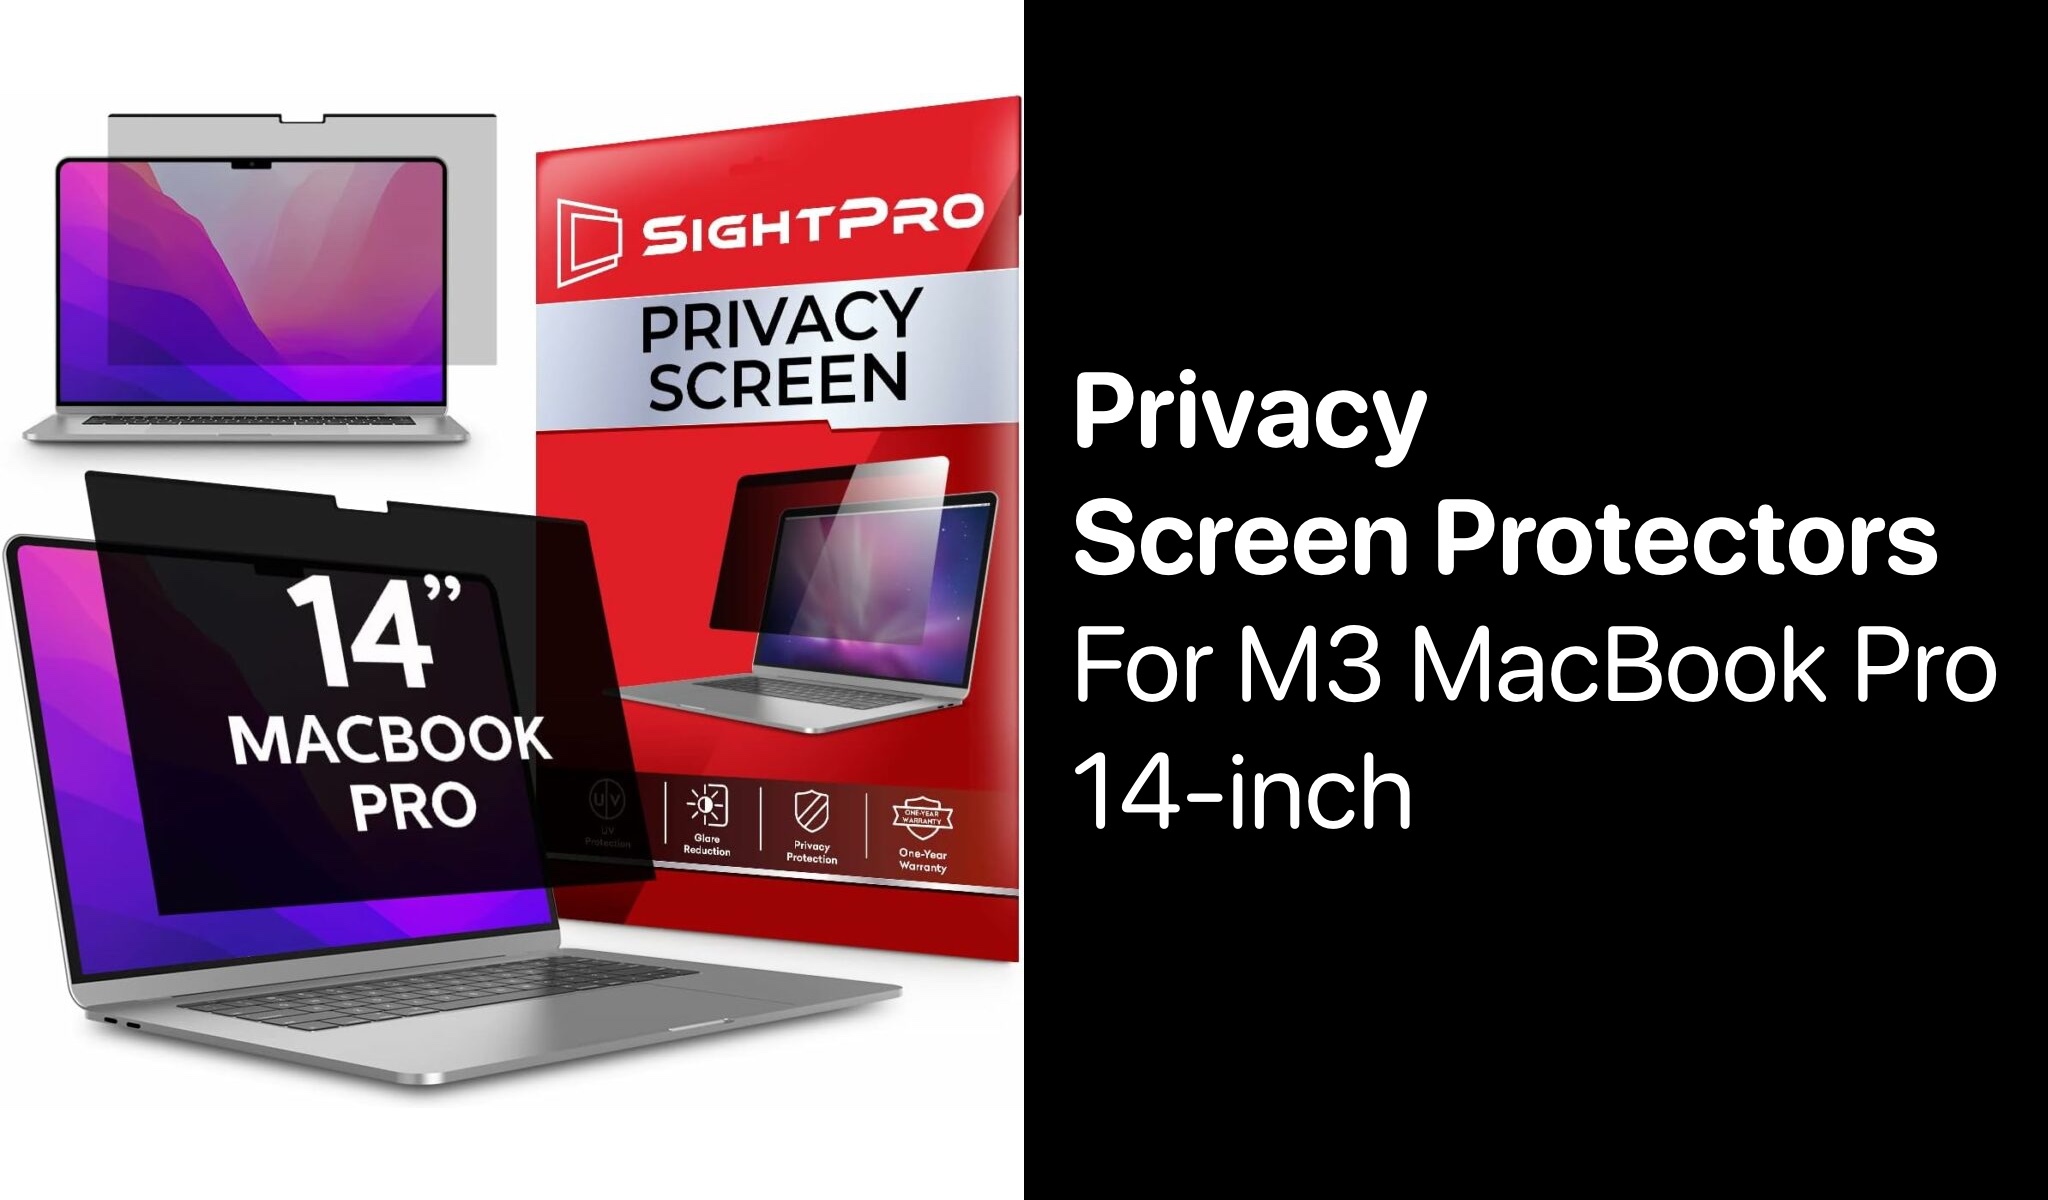 Best Privacy Screen Protectors For 14-inch M3 MacBook Pro - iOS Hacker